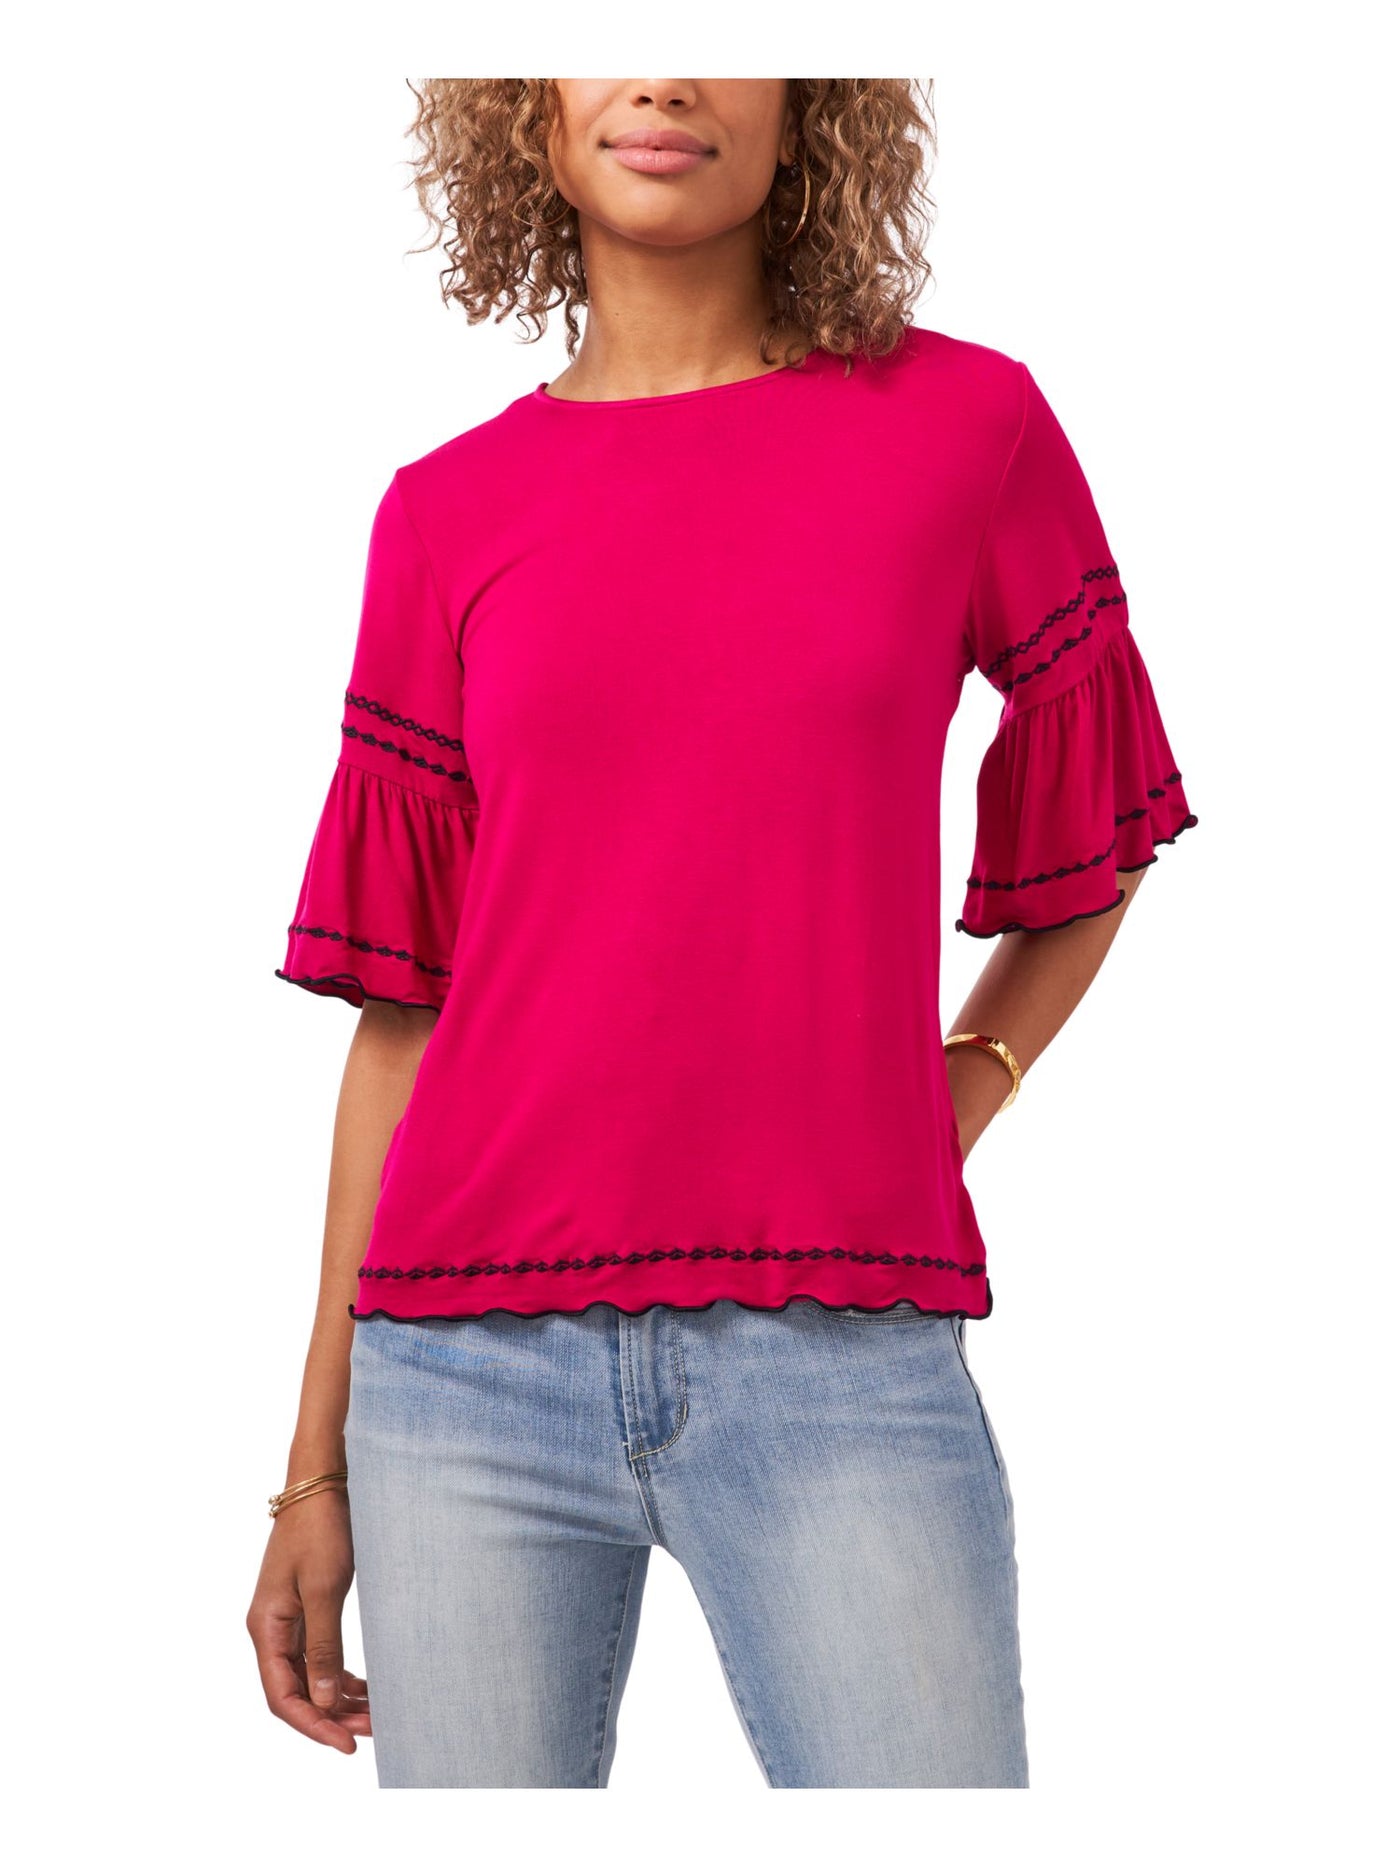 VINCE CAMUTO Womens Pink Stretch Bell Sleeve Round Neck Top XS